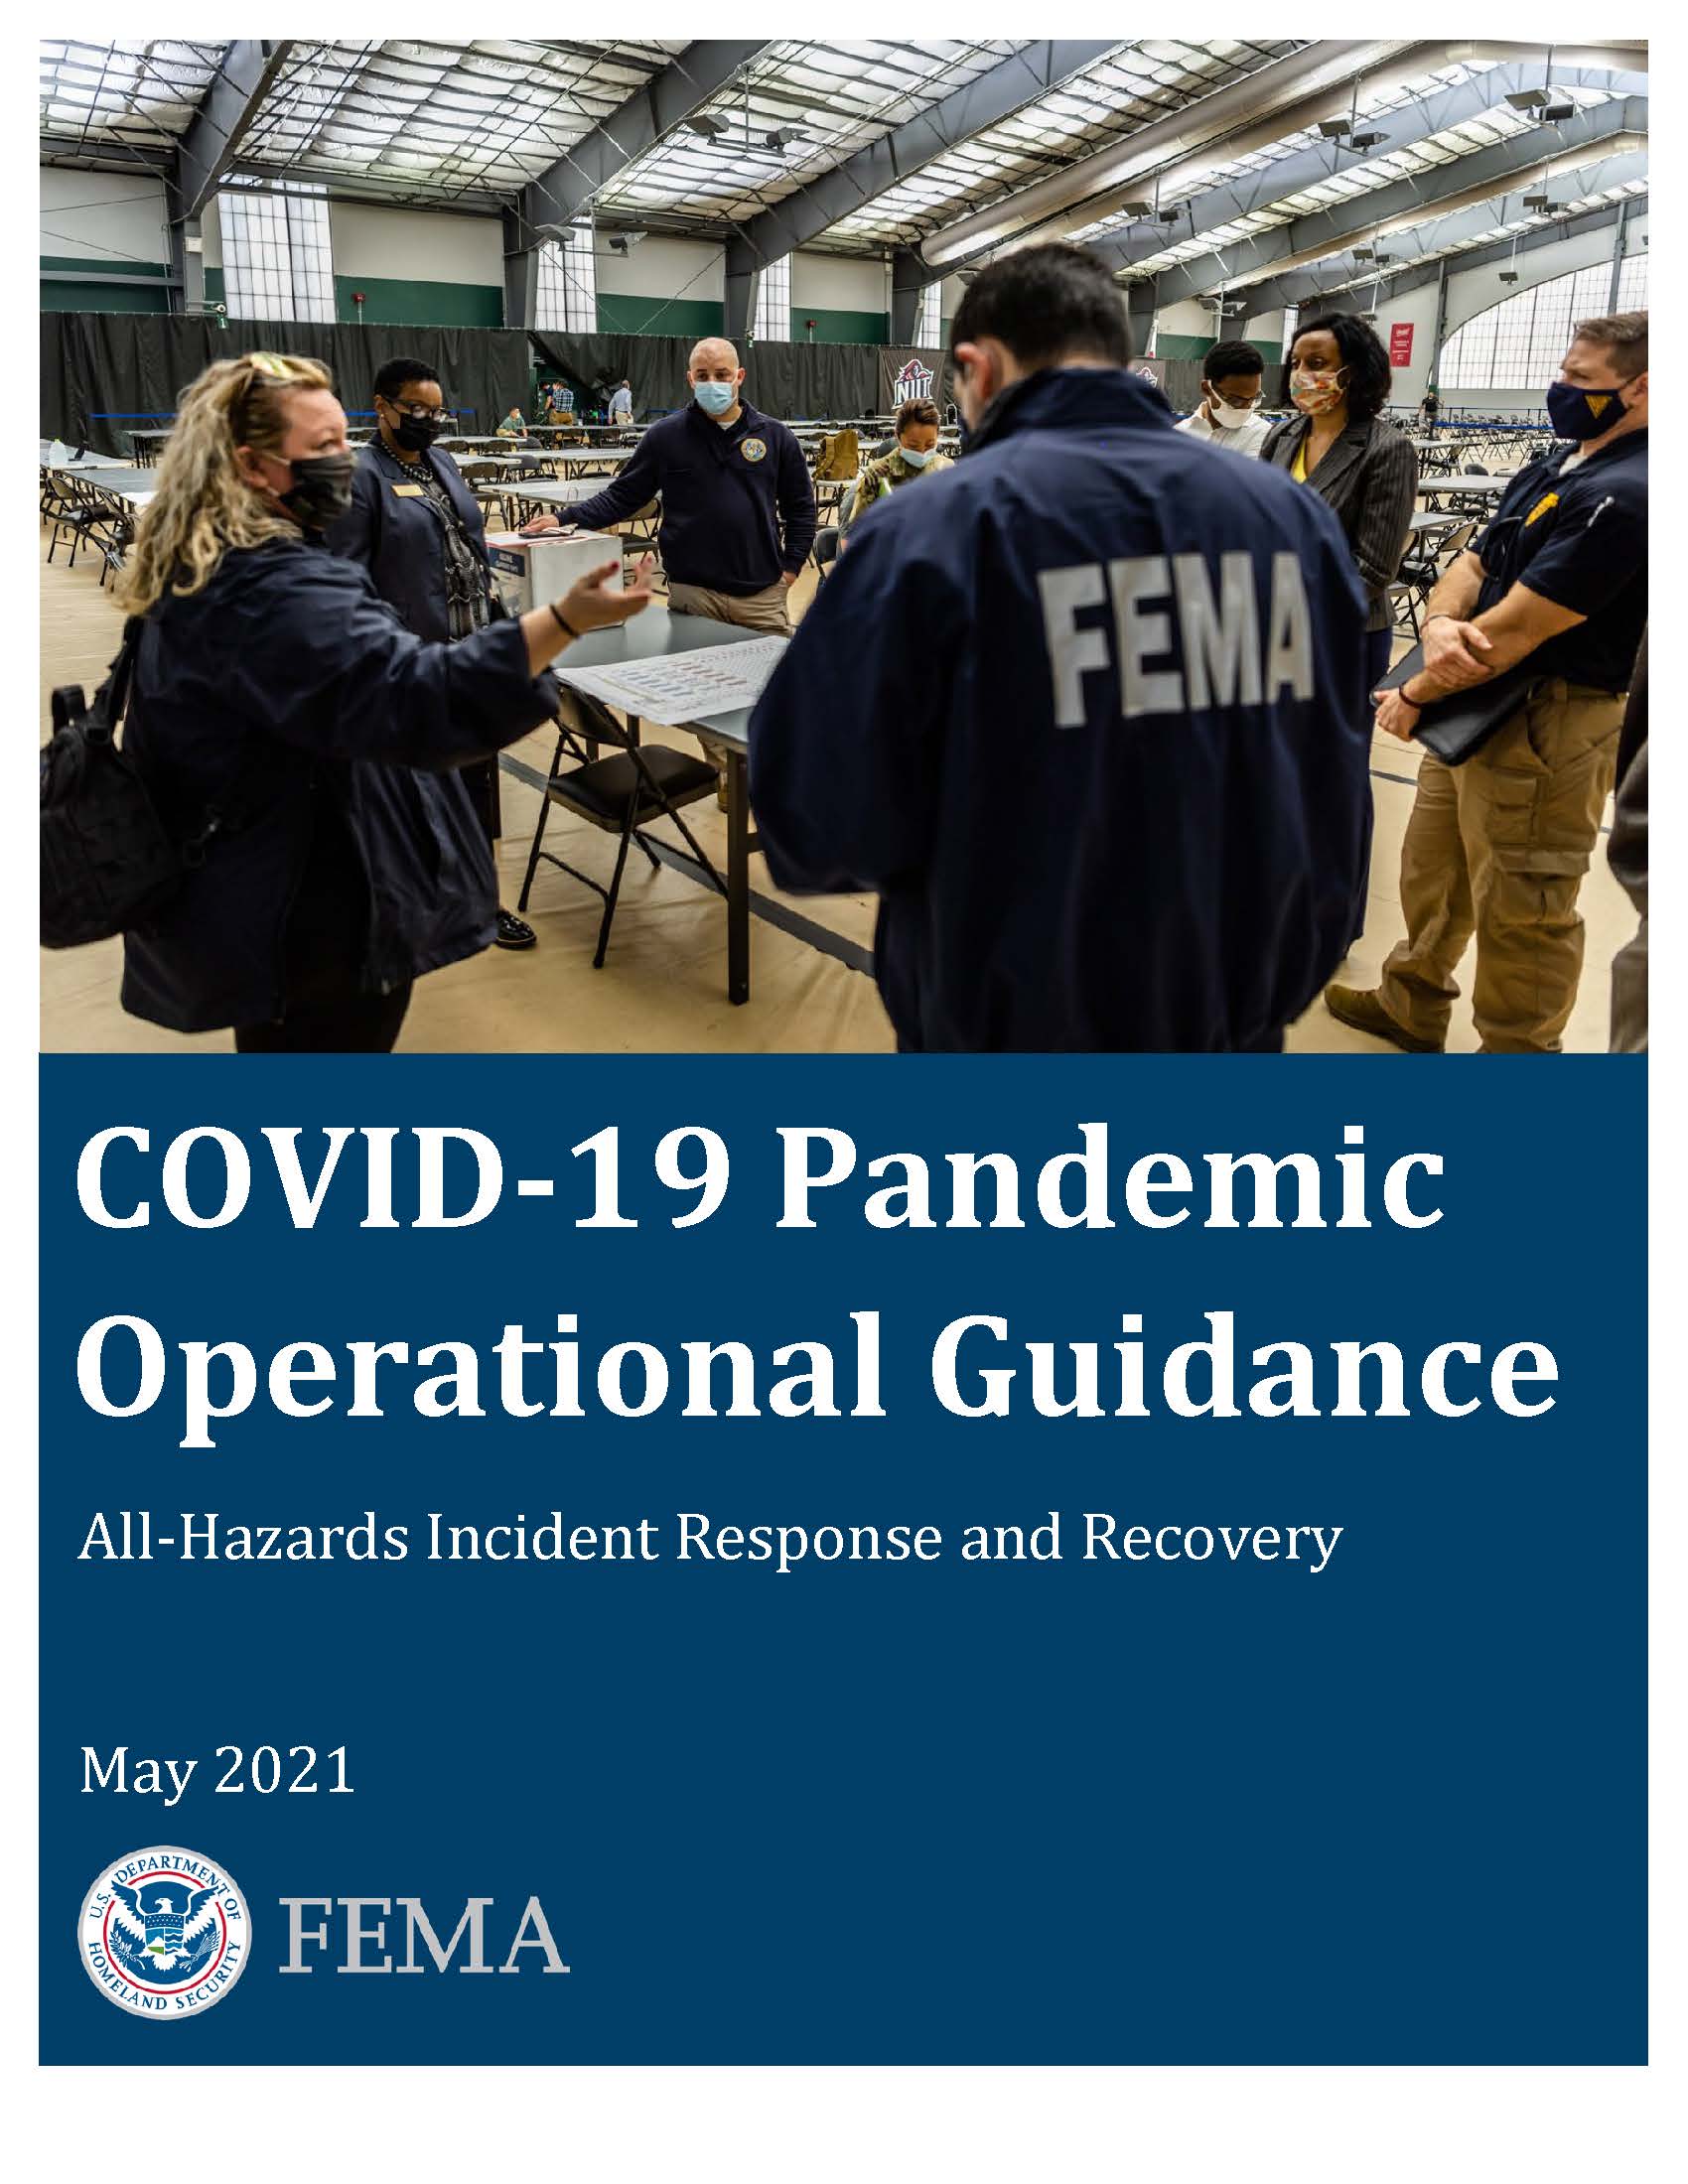 COVID-19 Pandemic Operational Guidance All-Hazards Incident Response and Recovery | May 2021